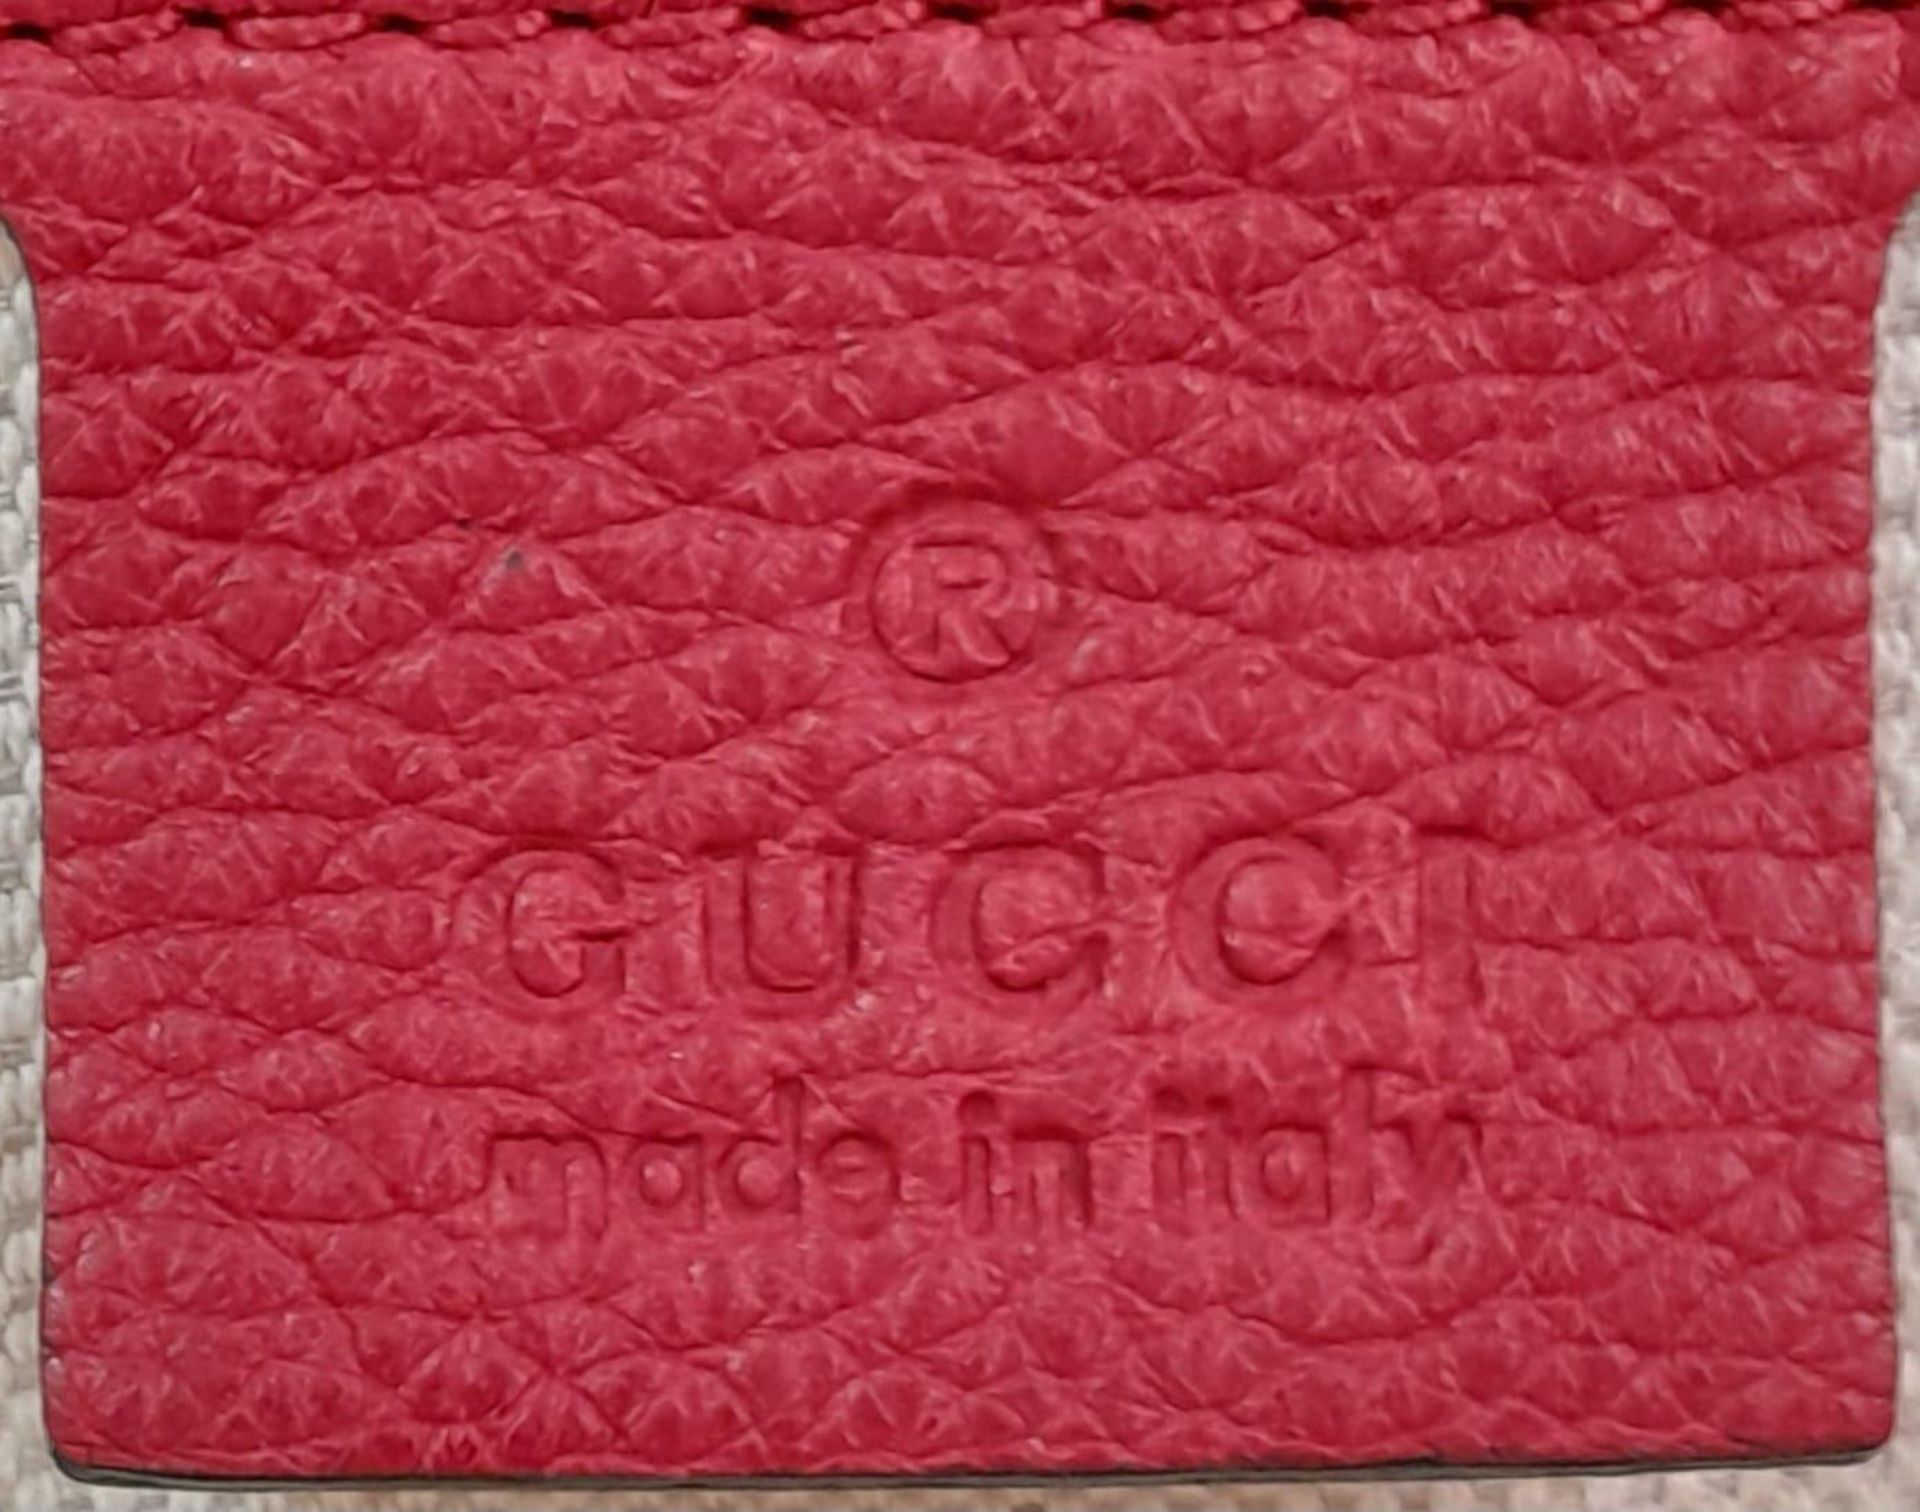 A Gucci Red Logo Shoulder Bag. Leather exterior with gold-toned hardware, adjustable strap and - Image 7 of 9